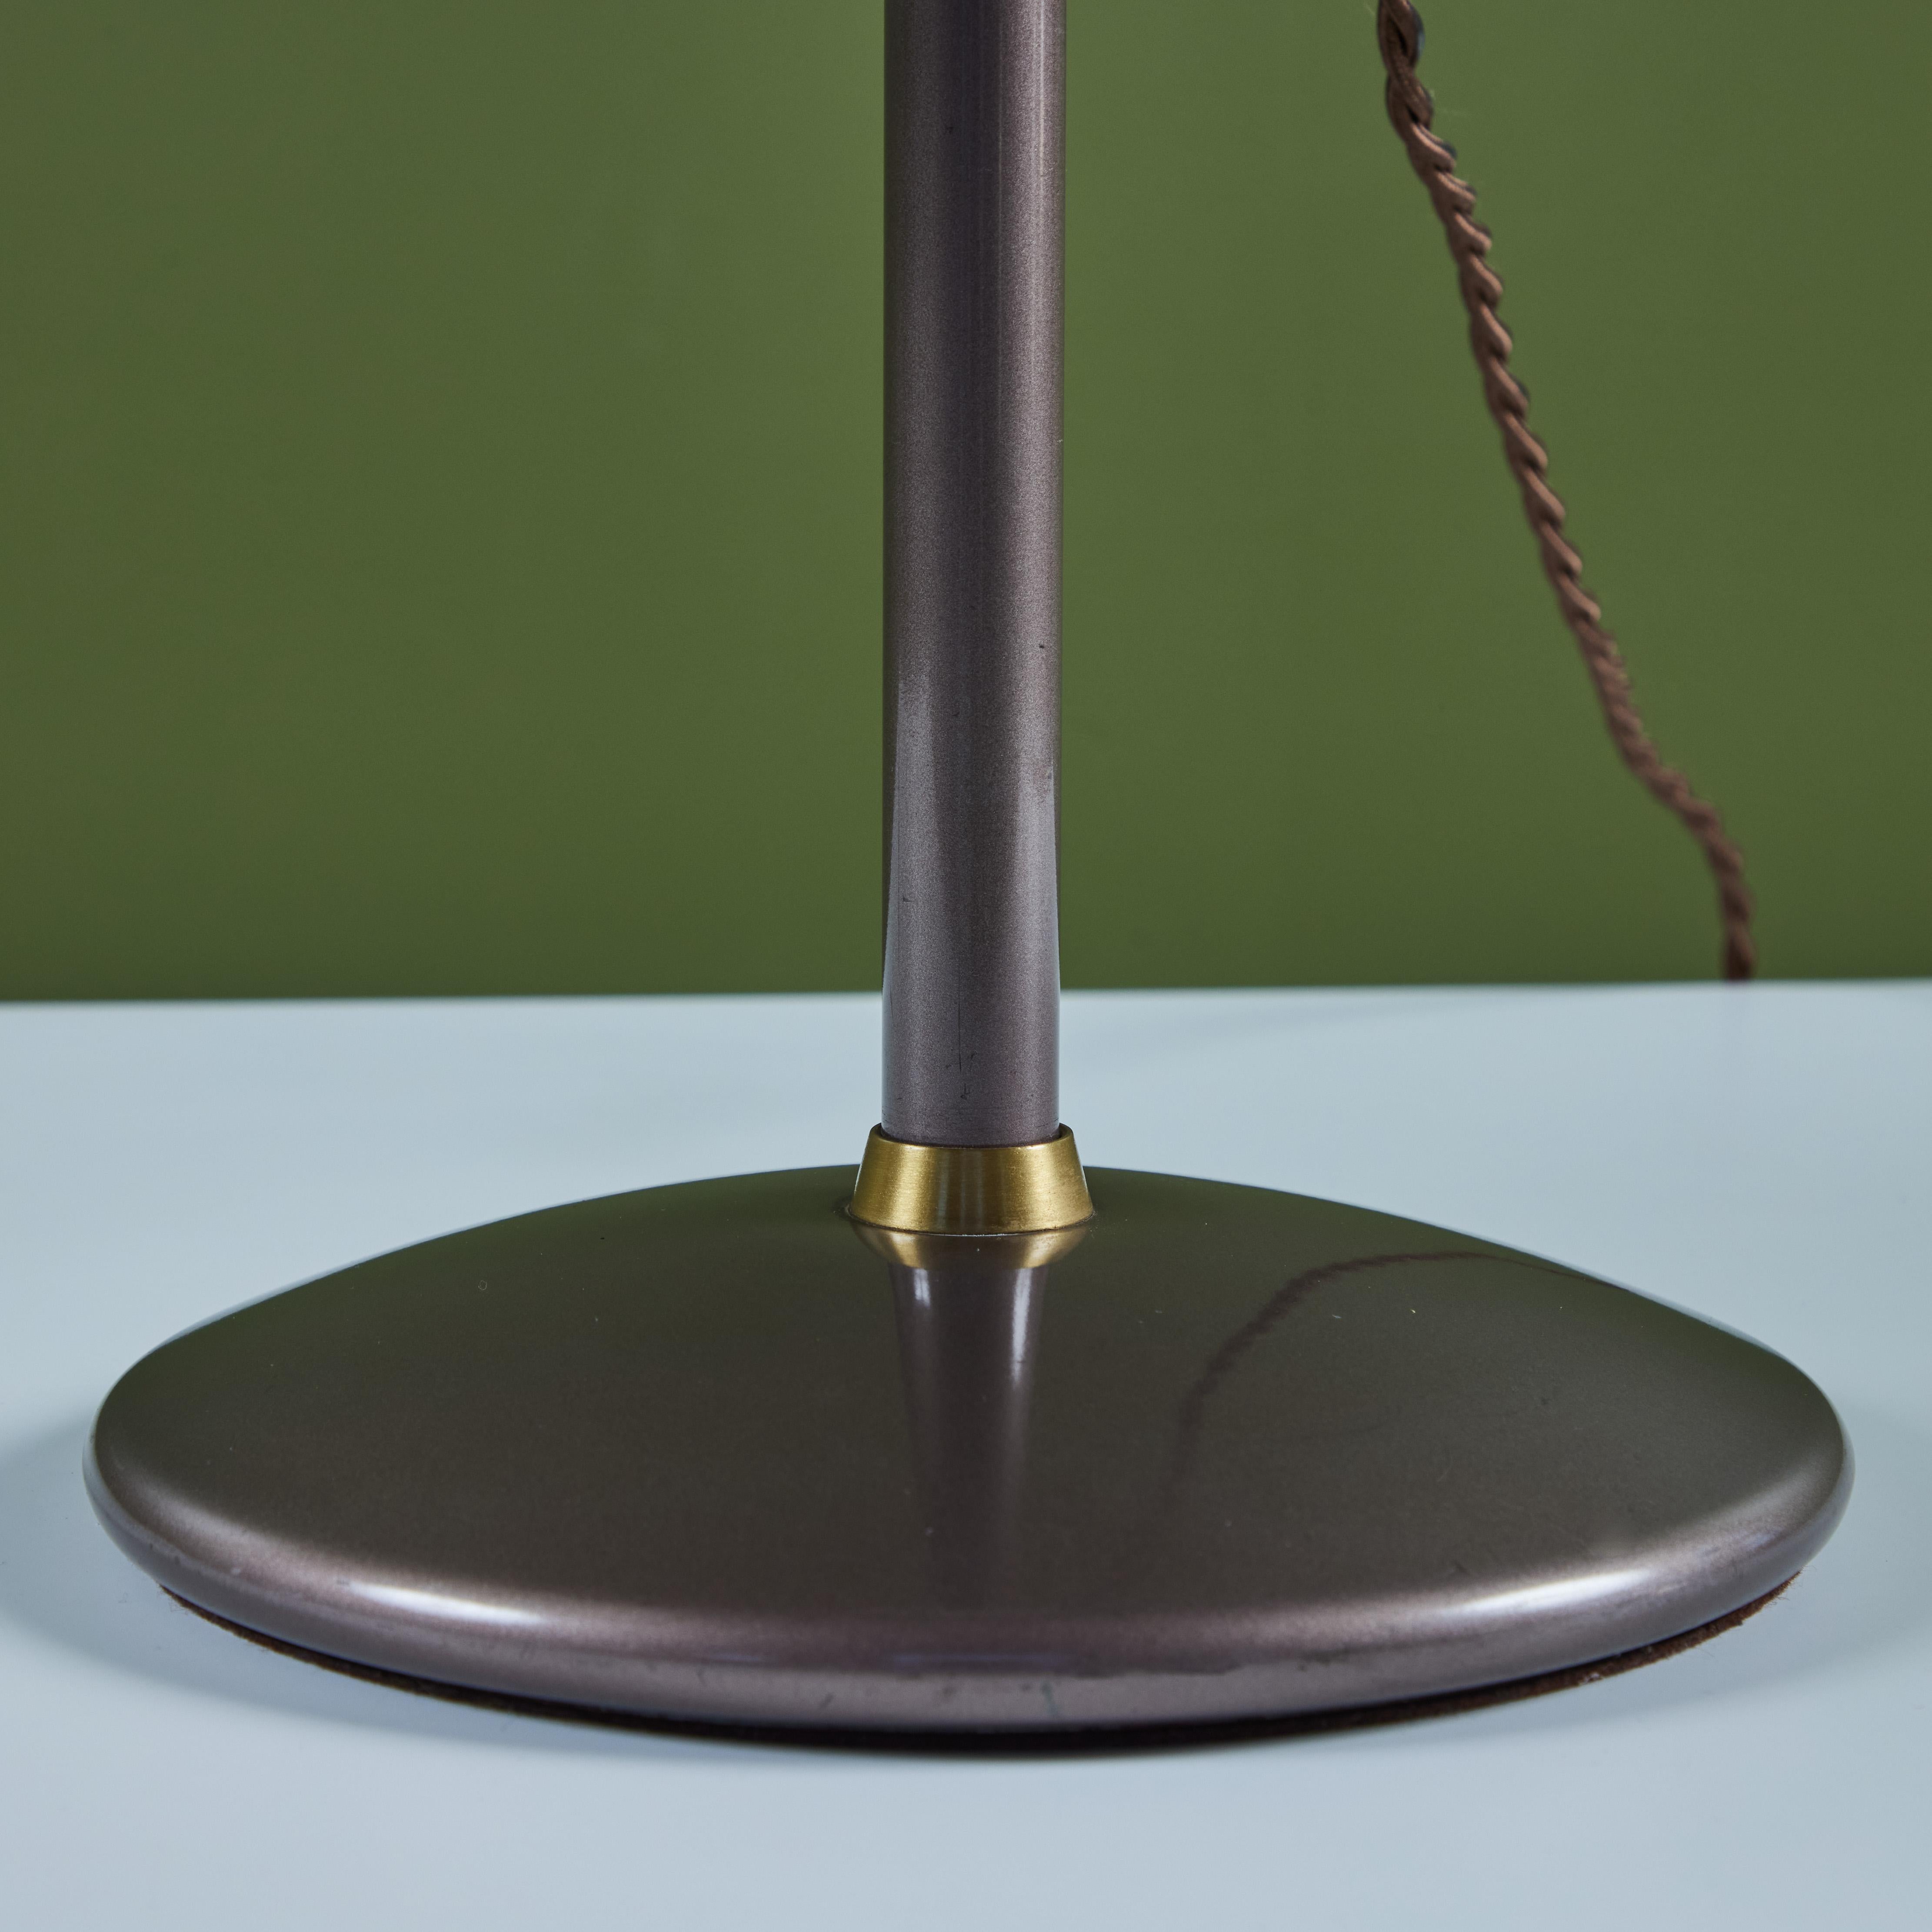 Dazor Taupe Enamel Desk Lamp with Brass Accents 6